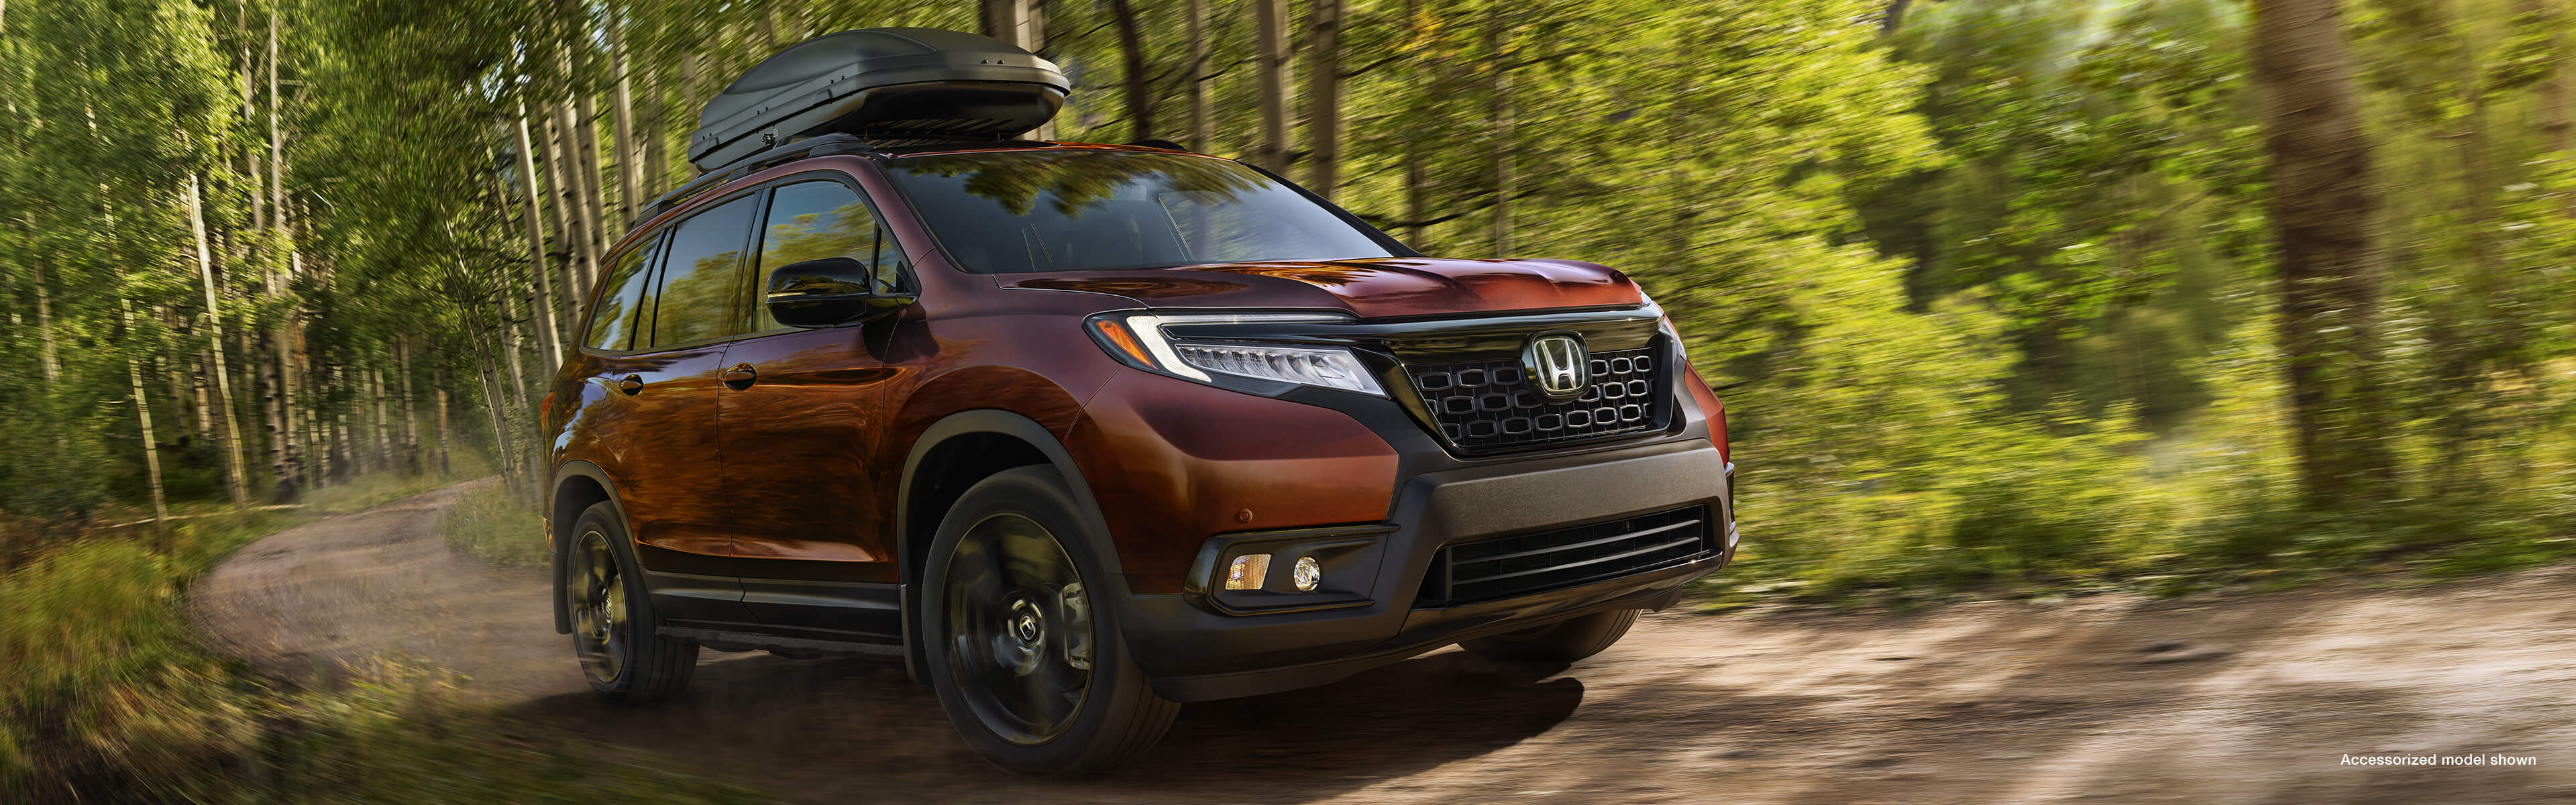 Front 3/4 view of 2021 Honda Passport Touring in Deep Scarlet Pearl with Honda Genuine Accessories, driving on a forest road.